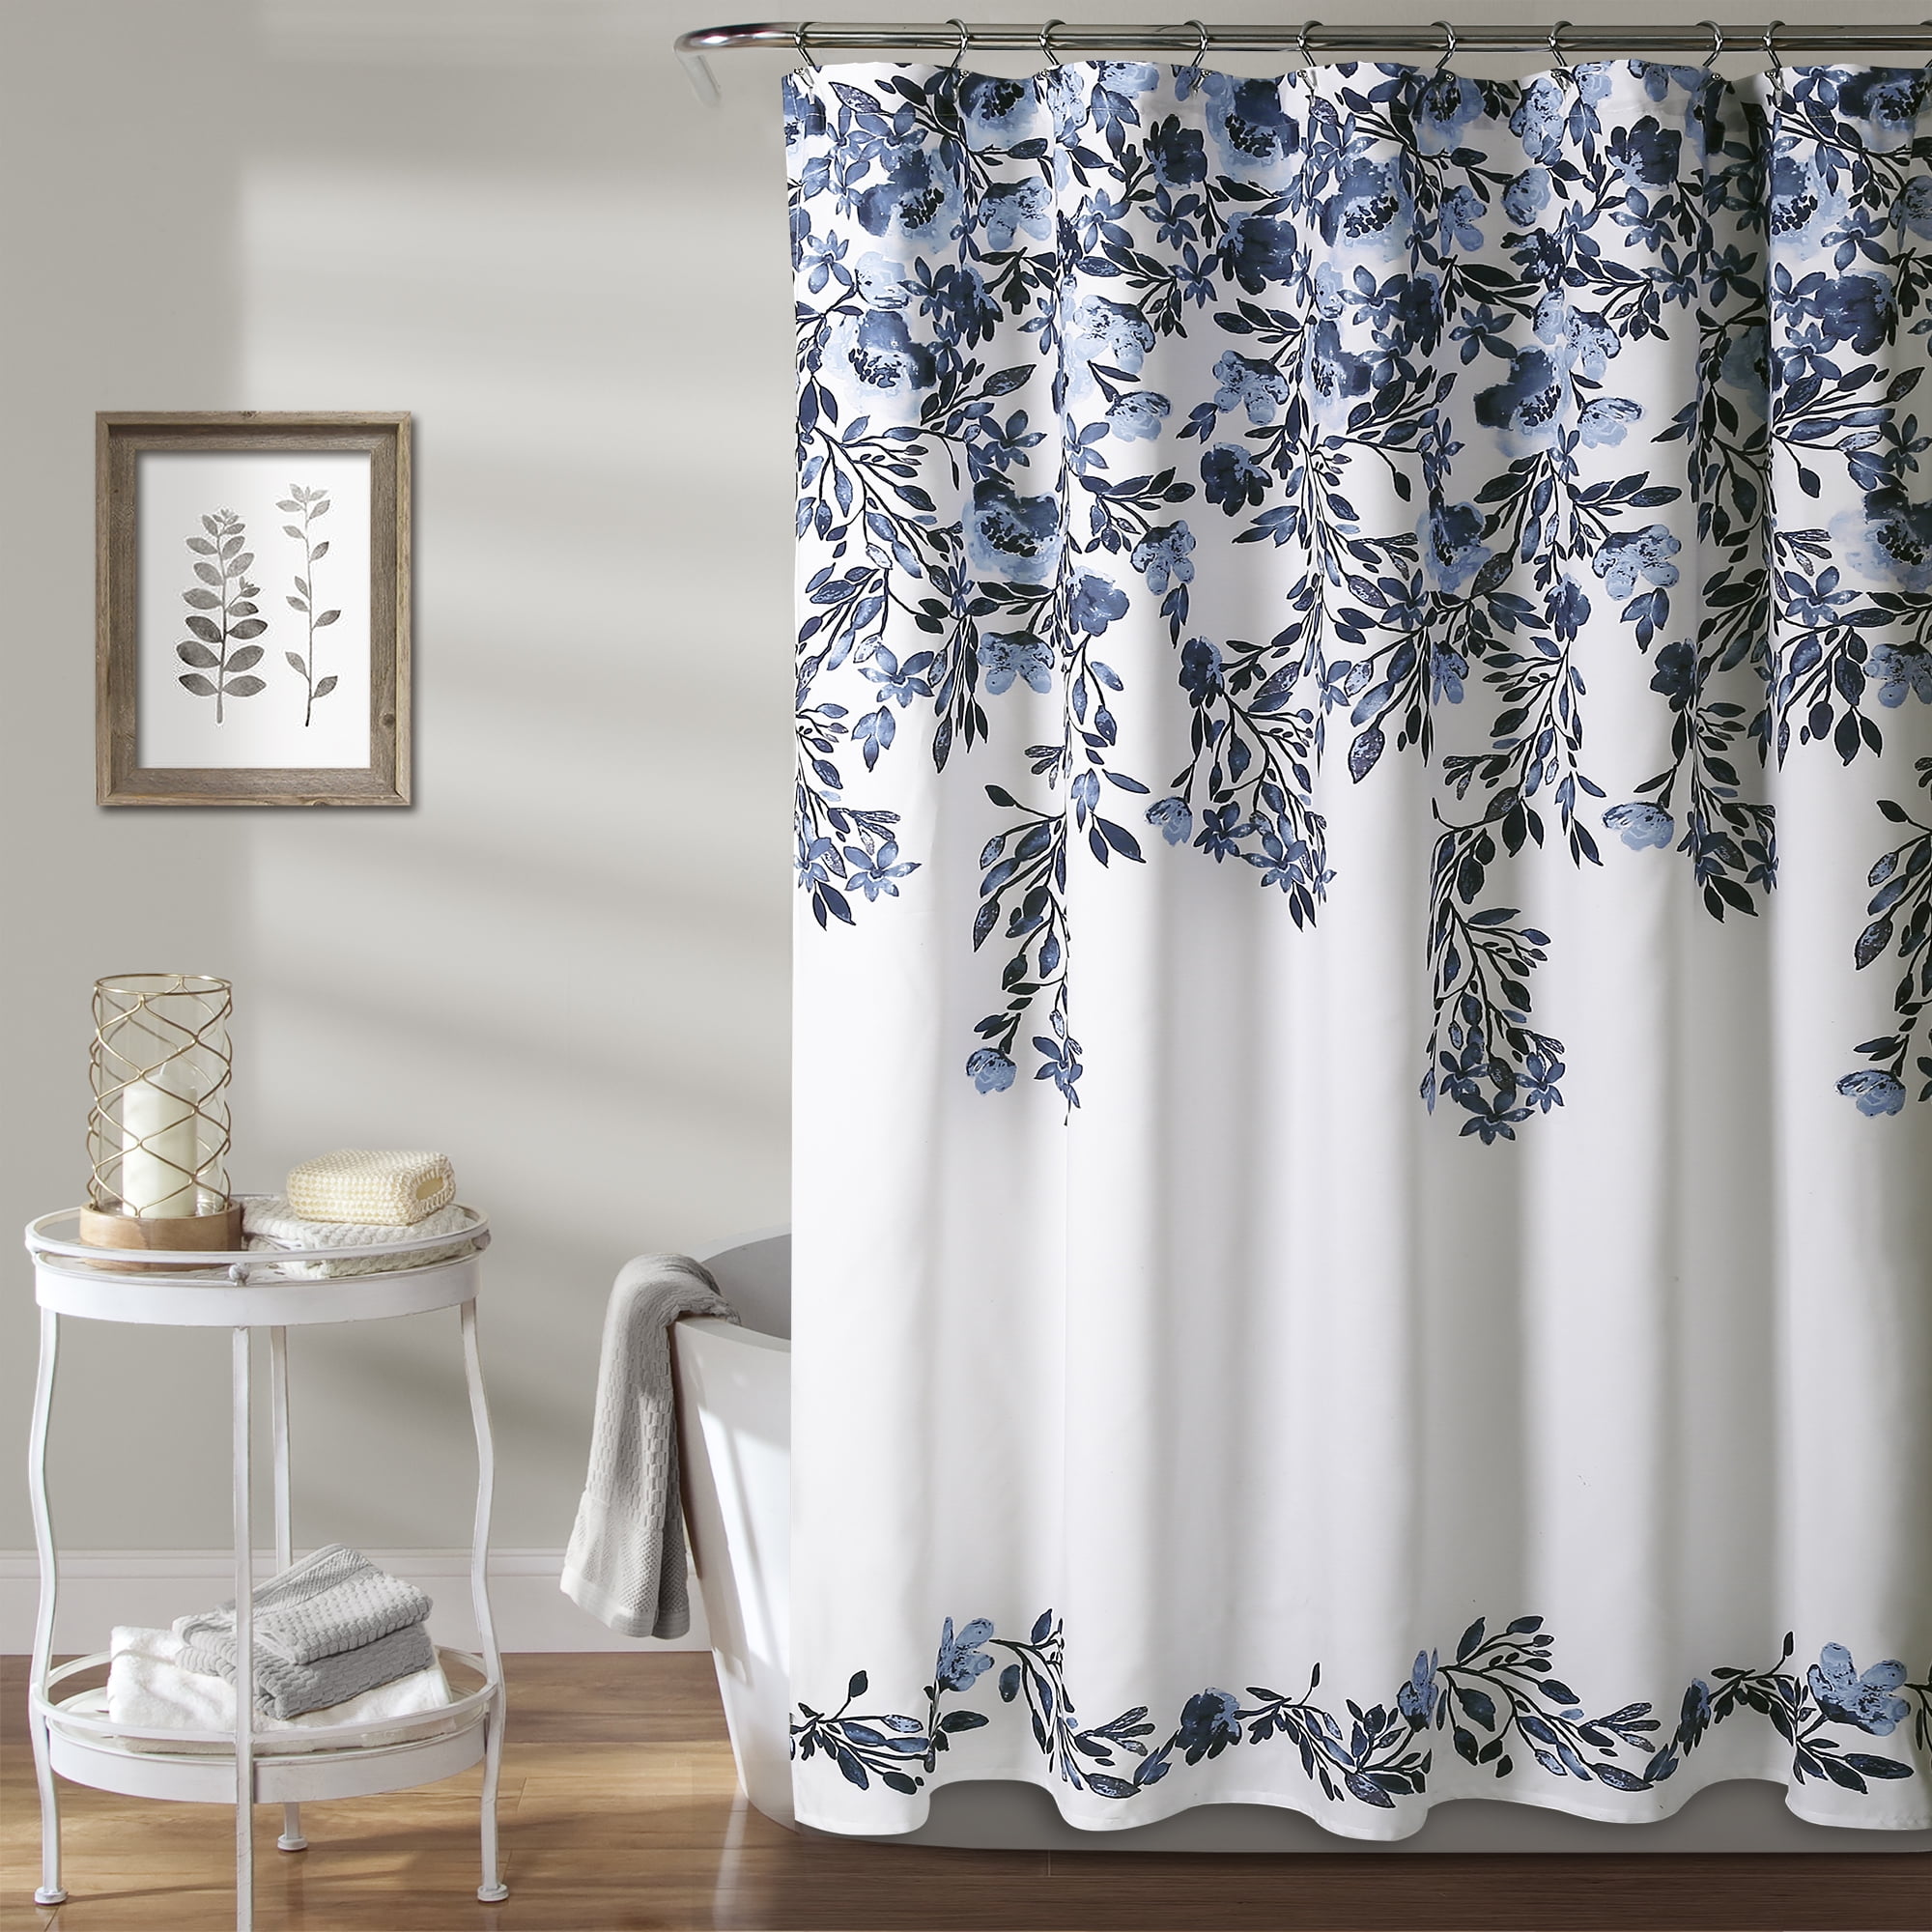 Bathroom Flower Floral Large Blooms Fabric Prin Details about   Lush Decor Leah Shower Curtain 